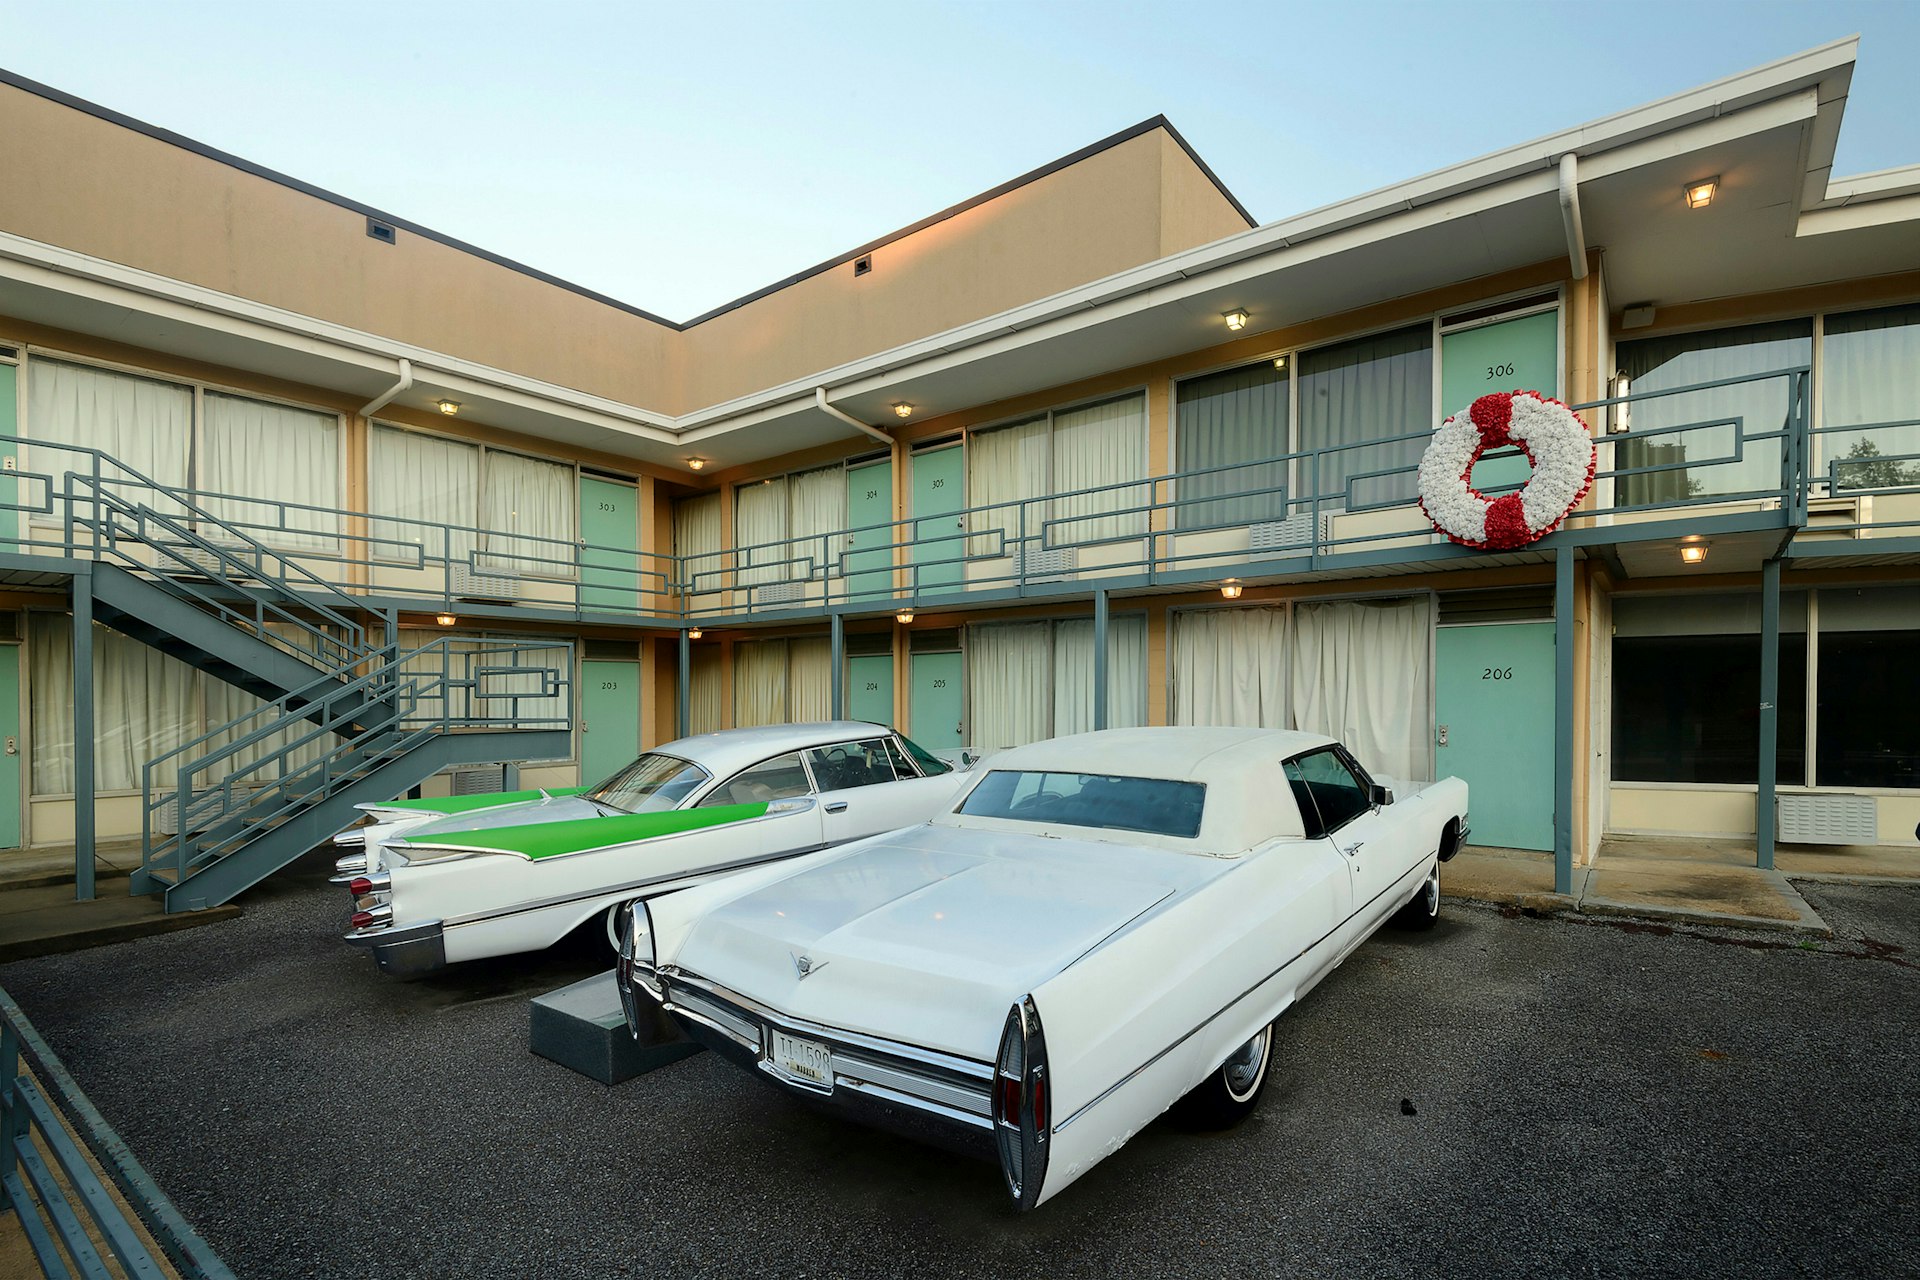 A pair of Cadillacs, one all white and the other white with green fins, are parked outside the balcony of the Lorraine Motel. The scene where Dr. Martin Luther King Jr. was assassinated.   